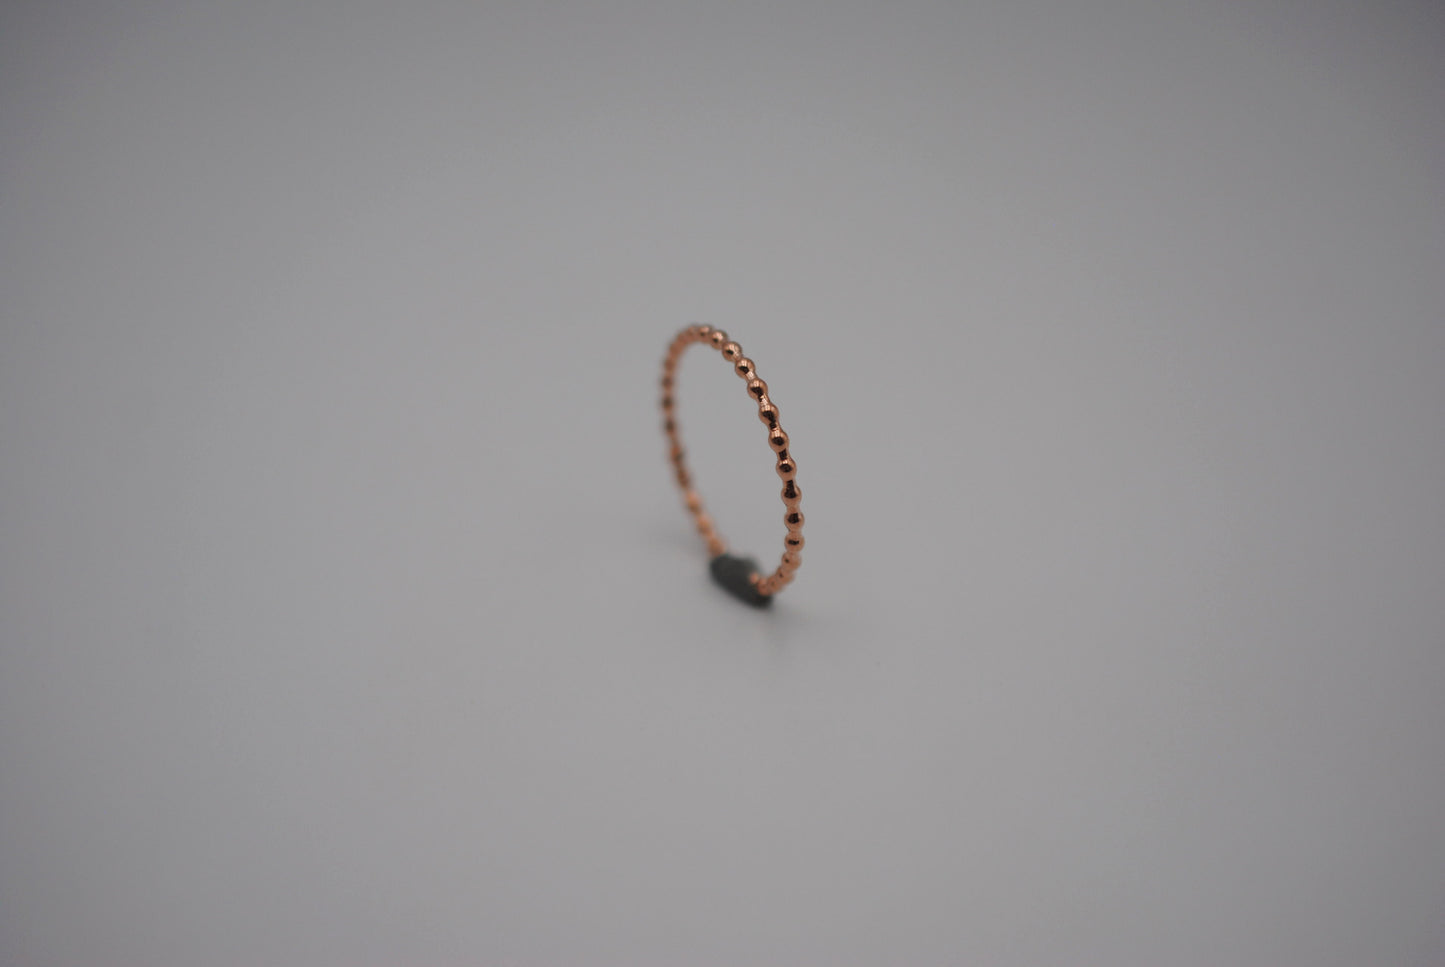 Stacking Ring: Bubble Texture, Rose Gold Finish, Thin Width